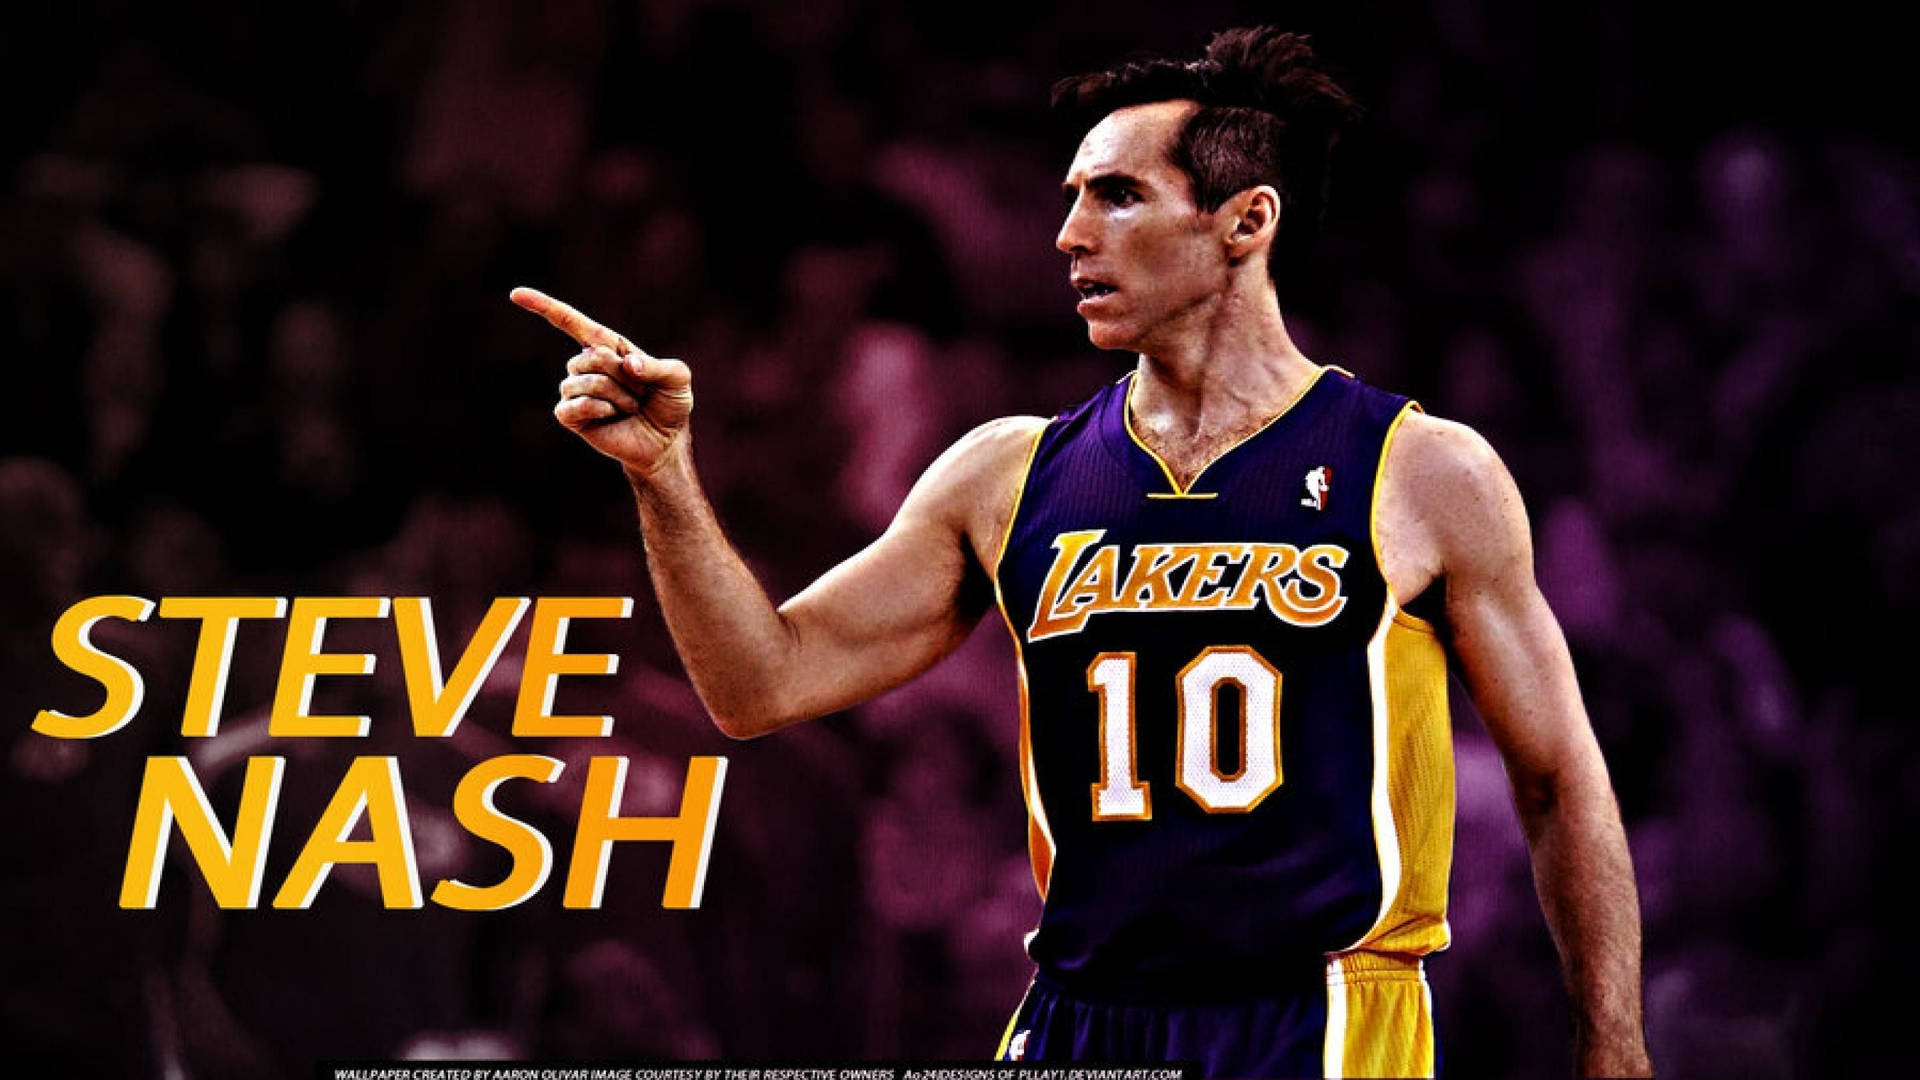 Steve Nash In Action For The Los Angeles Lakers